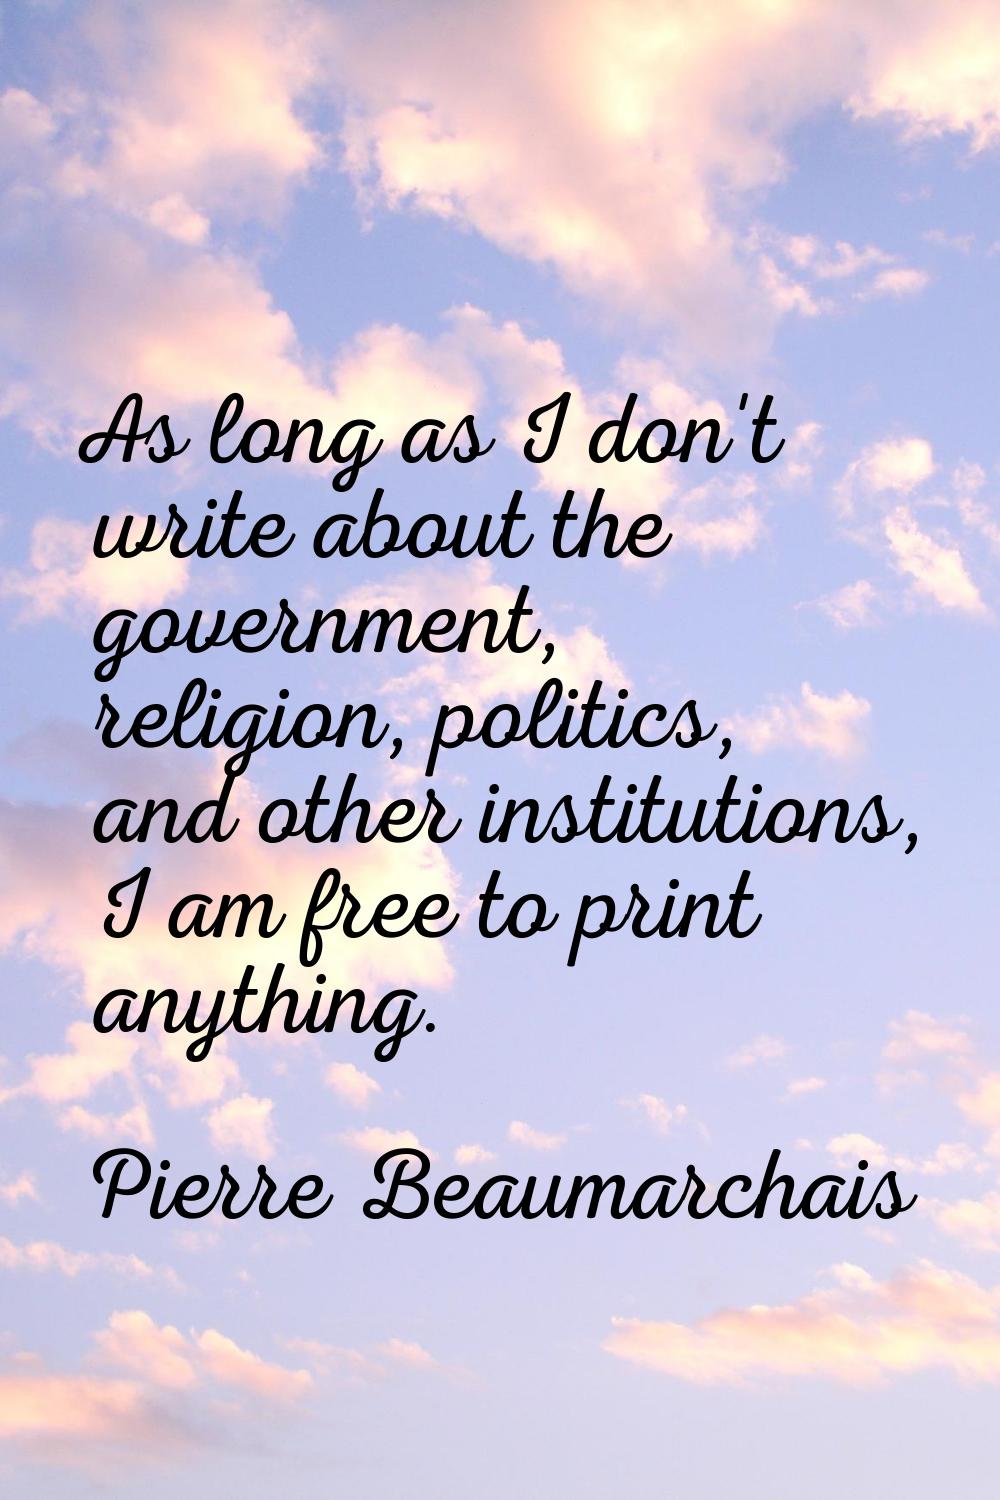 As long as I don't write about the government, religion, politics, and other institutions, I am fre